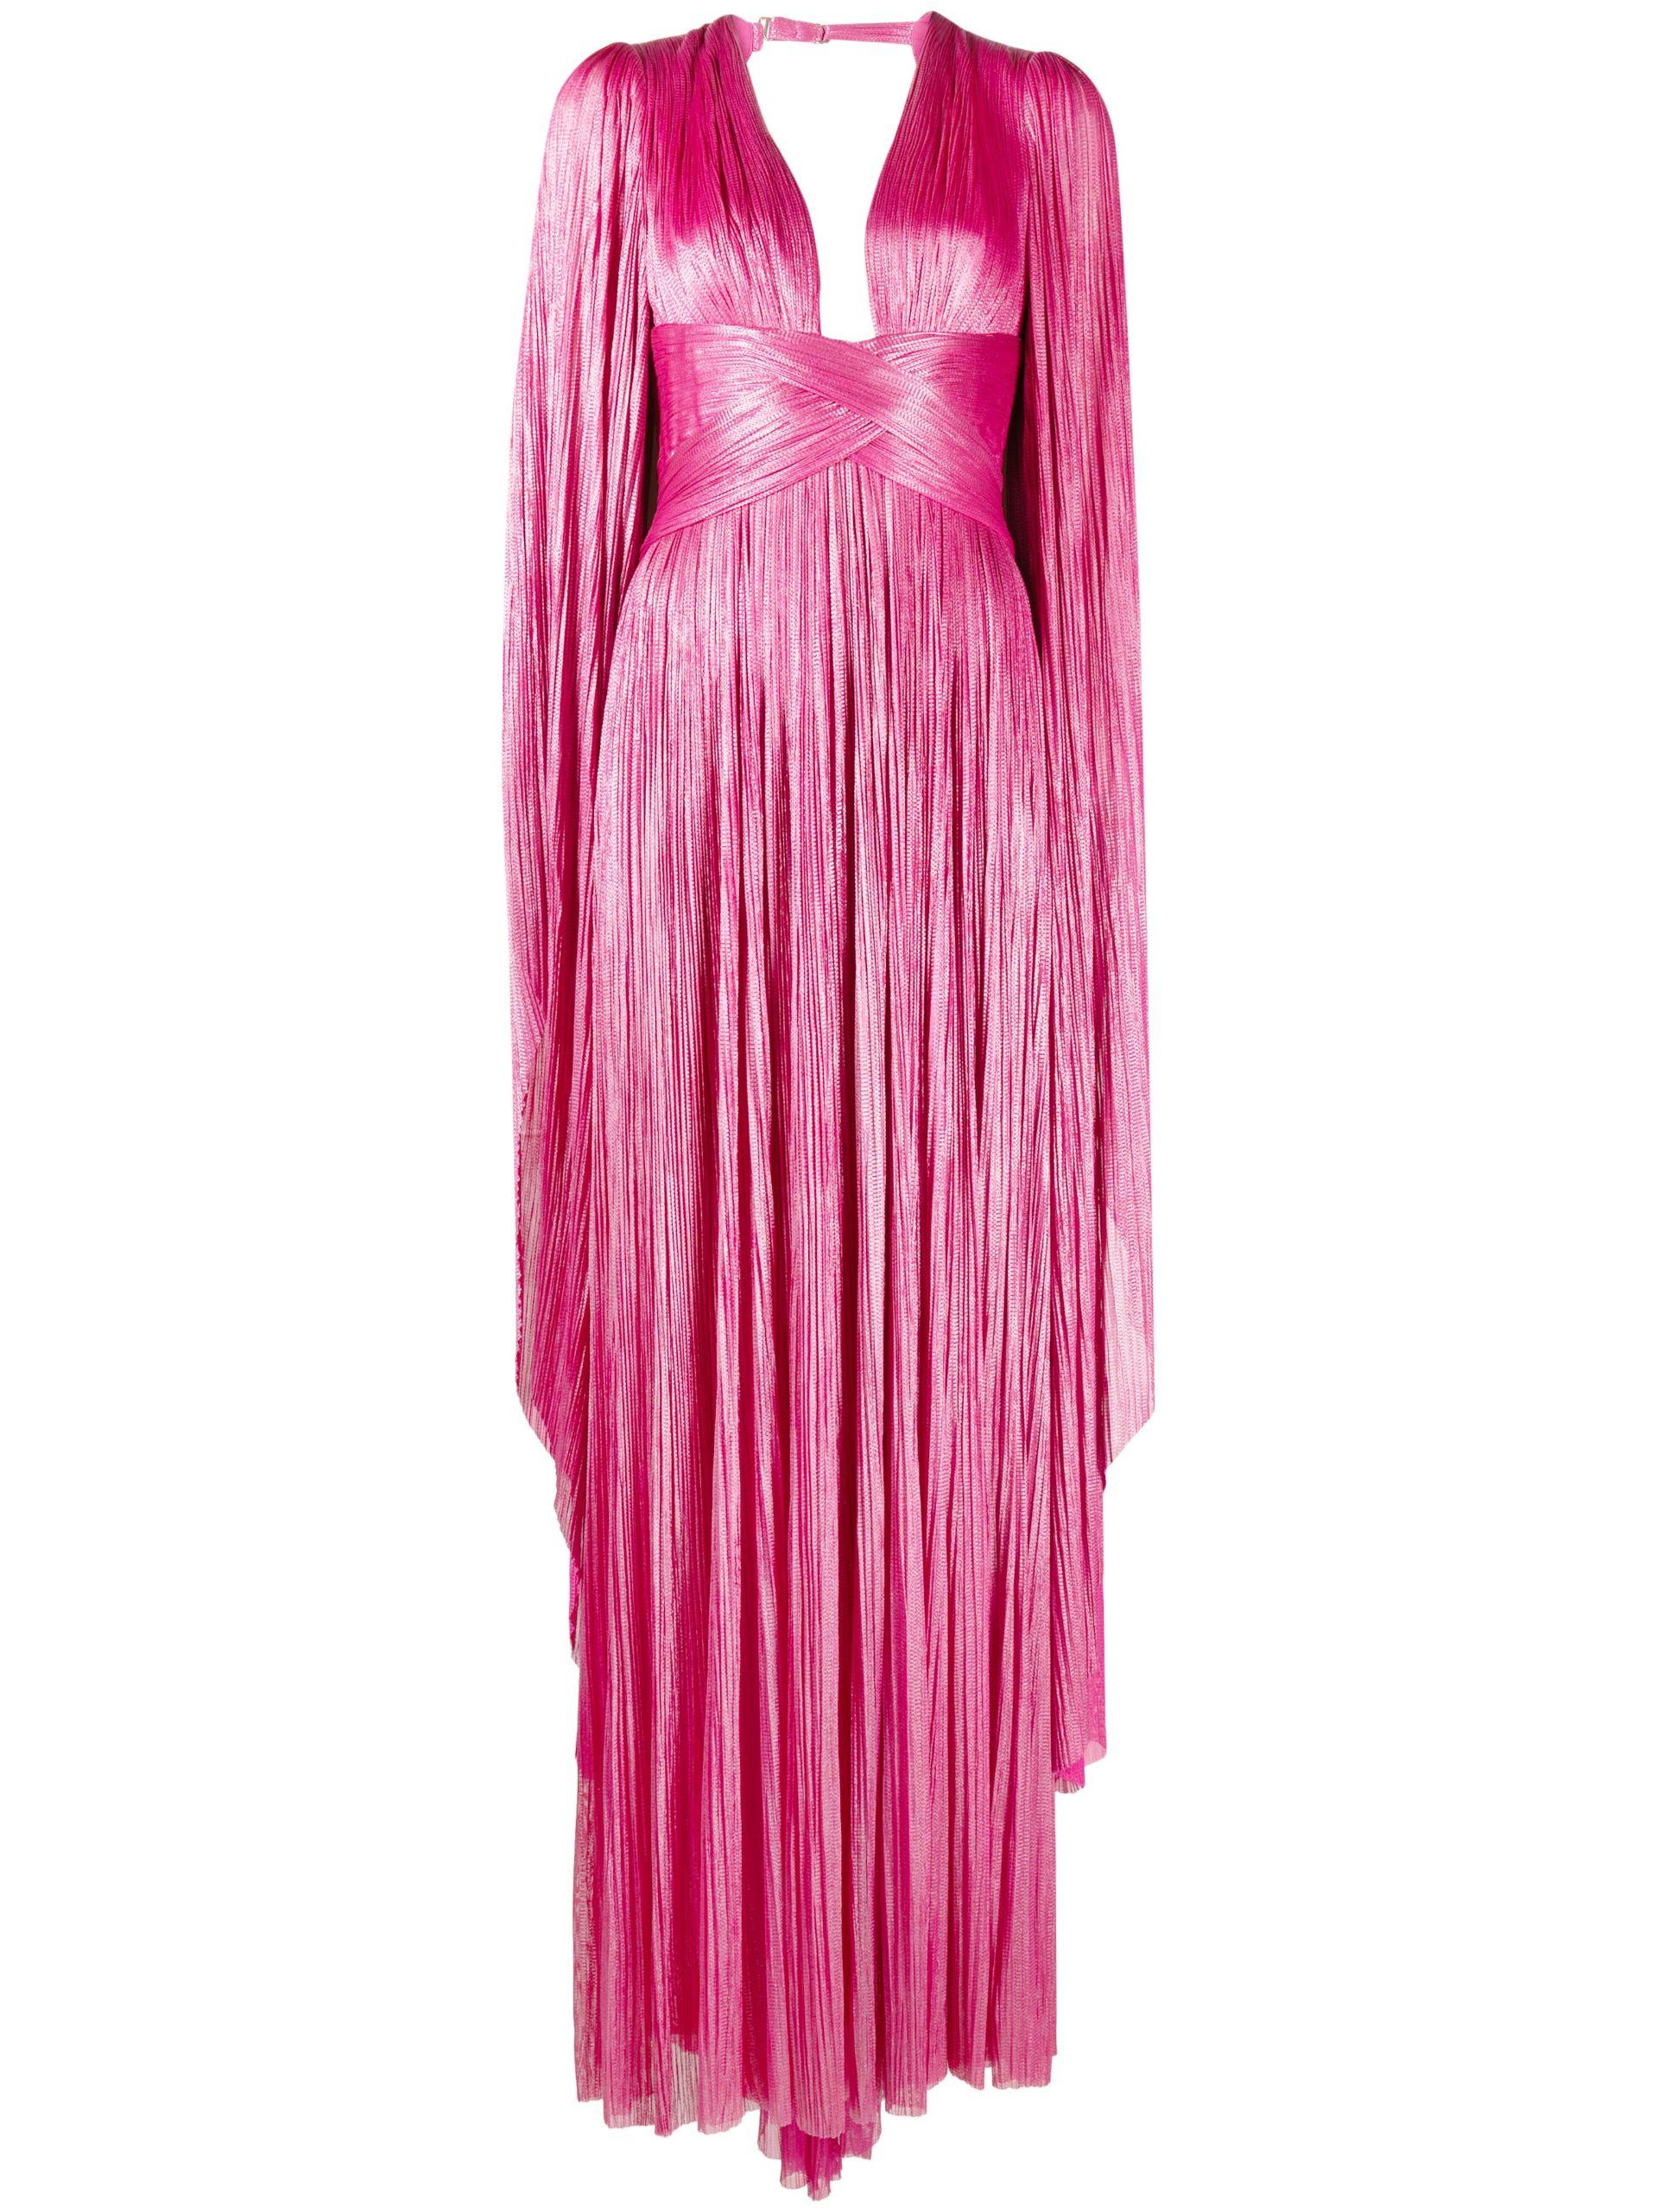 Maria Lucia Hohan Crystal Plung-neck Side-slit Gown in Pink | Lyst